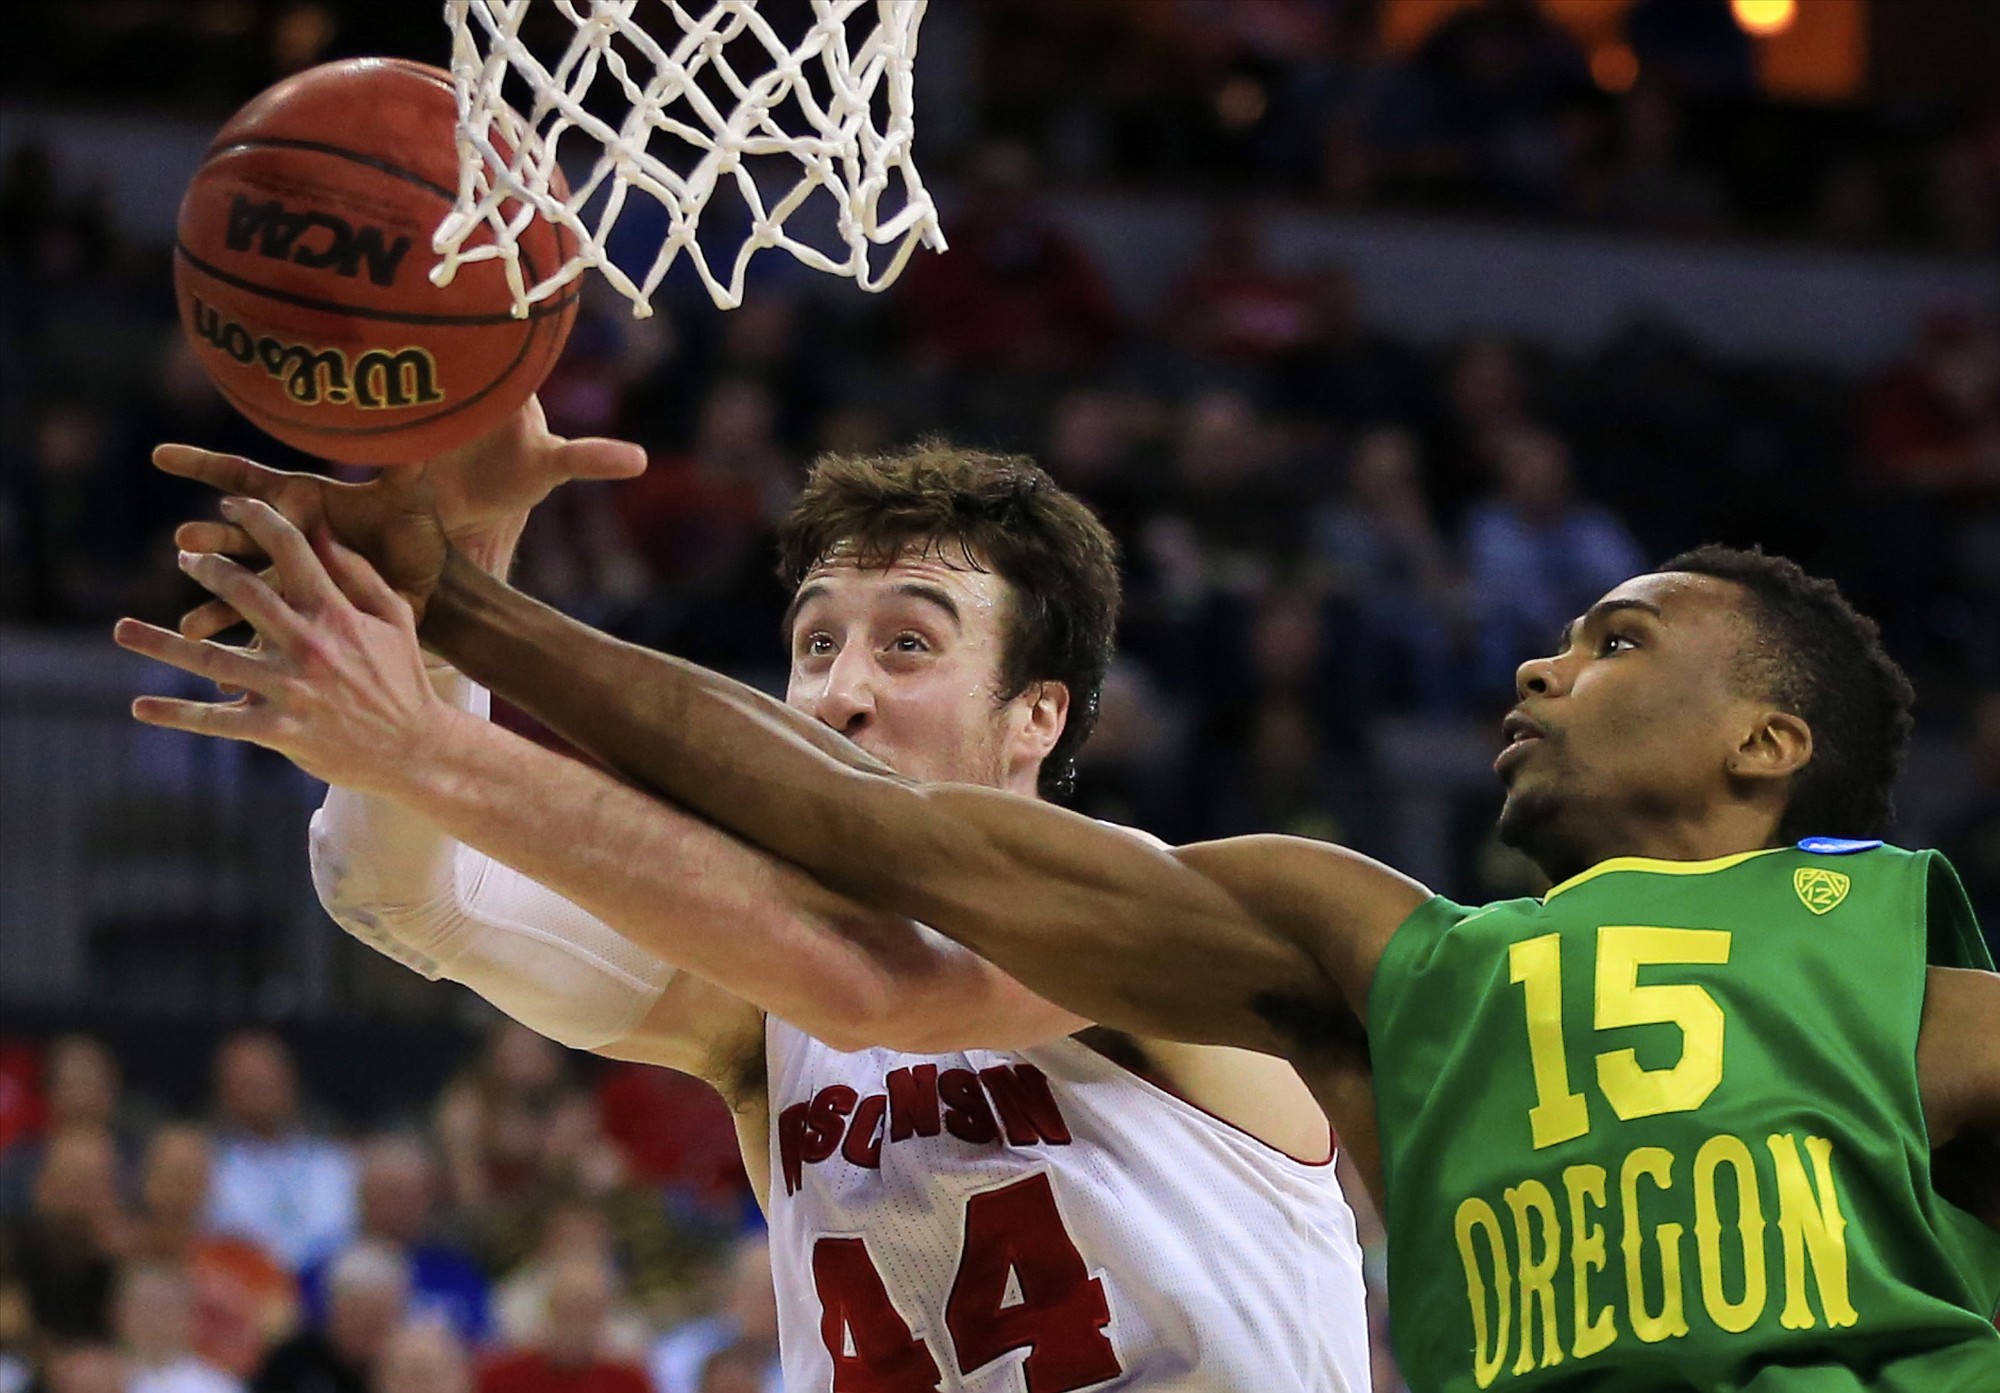 Oregon's Jalil Abdul-Bassit (15) and Wisconsin's Frank Kaminsky (44) compete for a rebound during the second half of an NCAA tournament game in Omaha, Neb., Sunday, March 22, 2015.